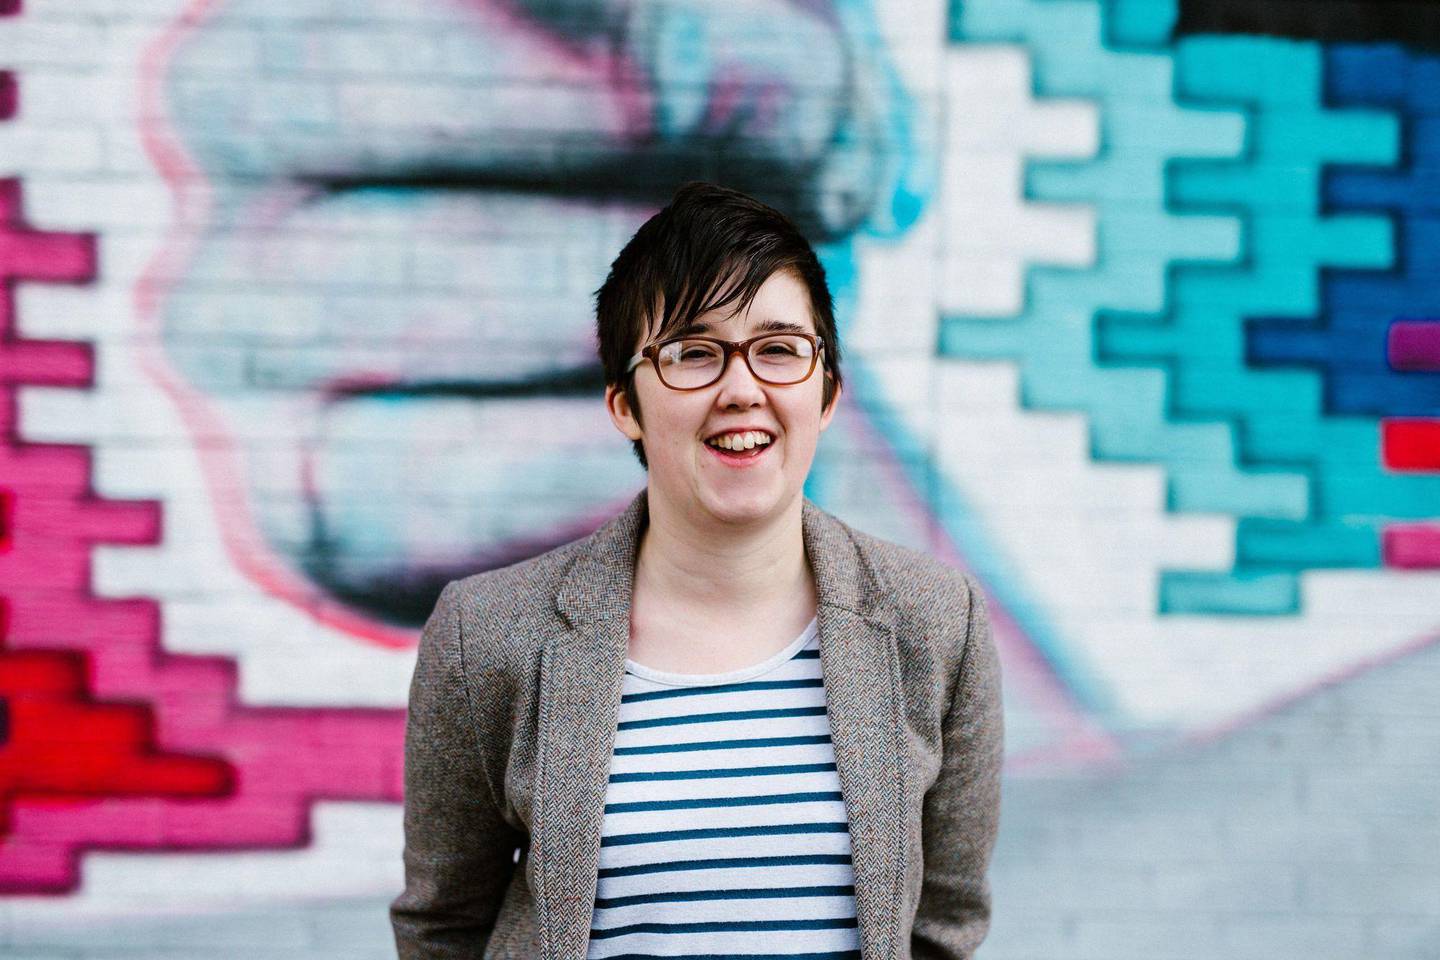 A handout picture released by Jess Lowe Photography on April 19, 2019 and taken on May 19, 2017 shows journalist and author Lyra McKee posing for a photograph in Belfast. - Journalist Lyra McKee was shot dead overnight during riots in the Creggan area of Derry, Northern Ireland, in what police on April 19, 2019 were treating as a terrorist incident following the latest upsurge in violence to shake the troubled region. (Photo by Jess LOWE / JESS LOWE PHOTOGRAPHY / AFP) / RESTRICTED TO EDITORIAL USE - MANDATORY CREDIT "AFP PHOTO / JESS LOWE PHOTOGRAPHY " - NO MARKETING NO ADVERTISING CAMPAIGNS - DISTRIBUTED AS A SERVICE TO CLIENTS